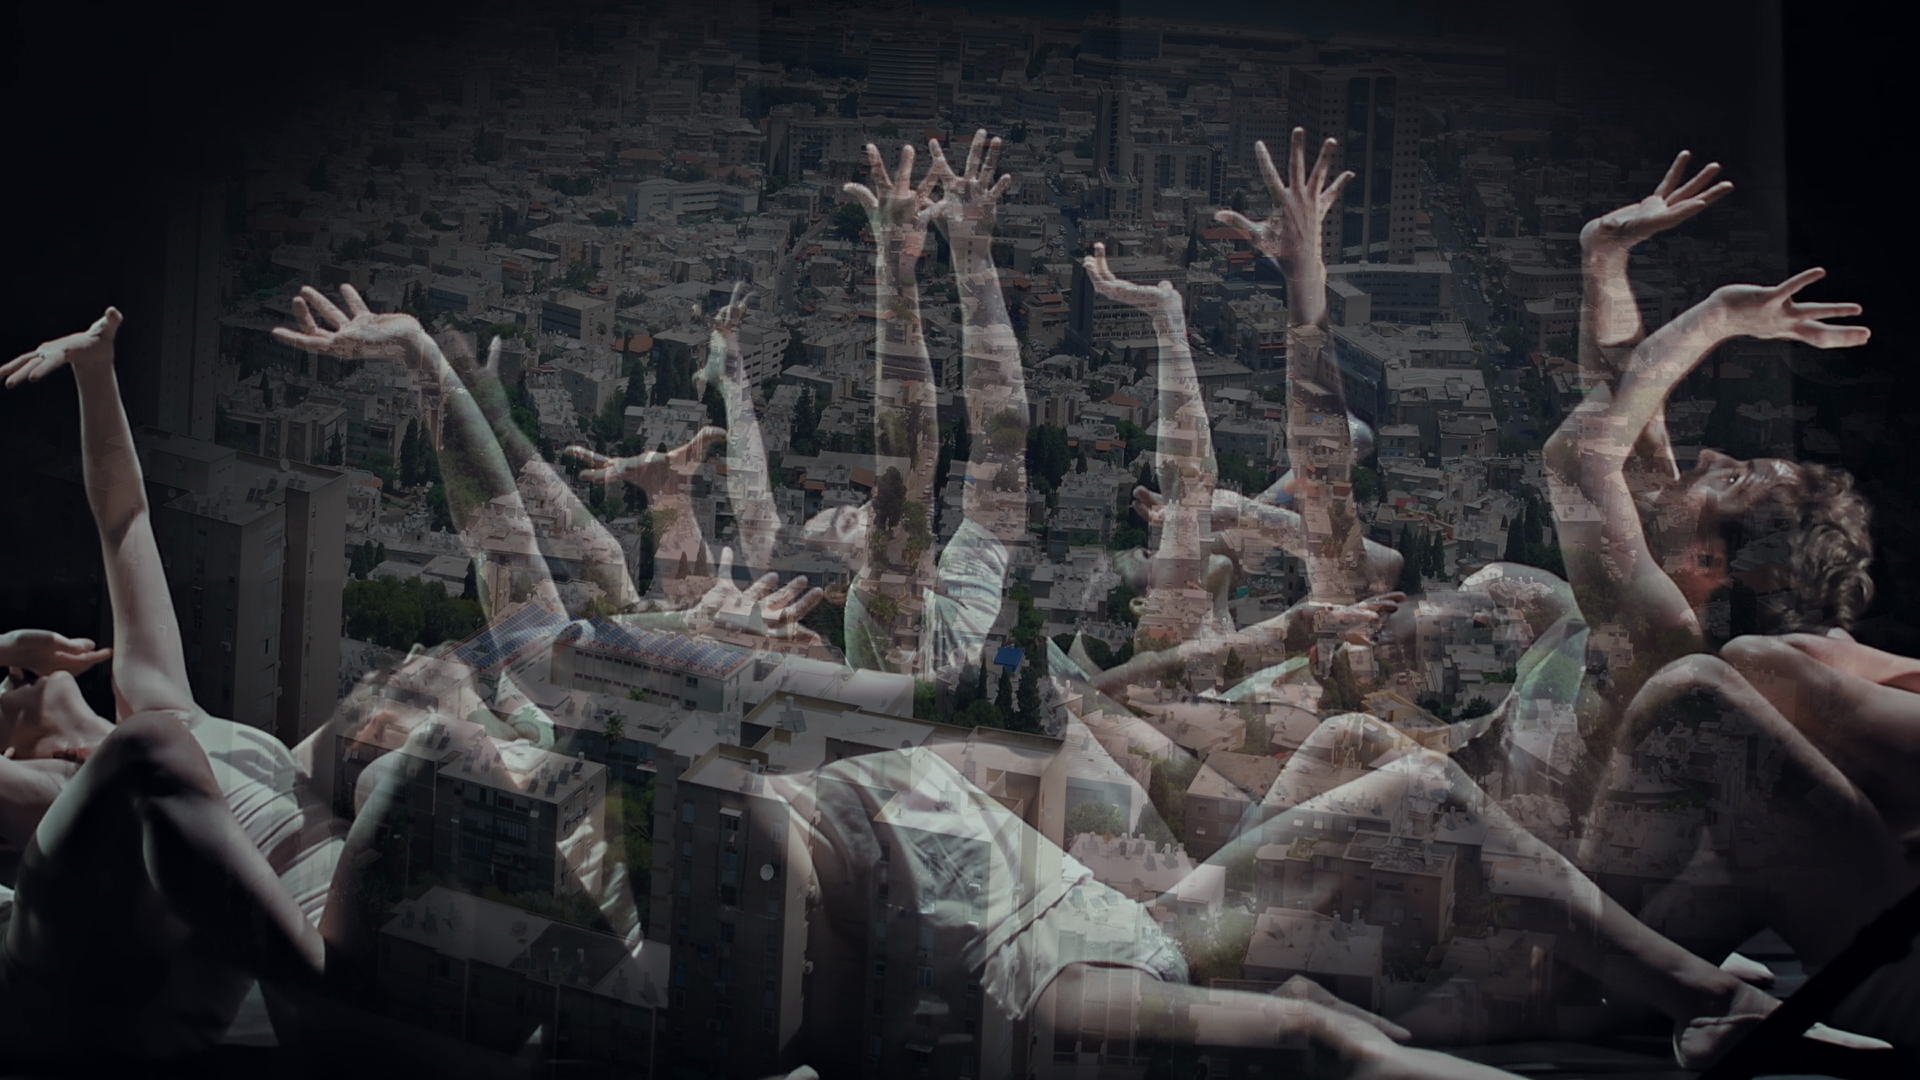 A still from a documentary shows a transparent image of a group of dancers overlaid on an image of a gray cityscape. The dancers, male and females dress in minimalist white costumes, bend backwards as some reach with mangled fingers toward the sky.